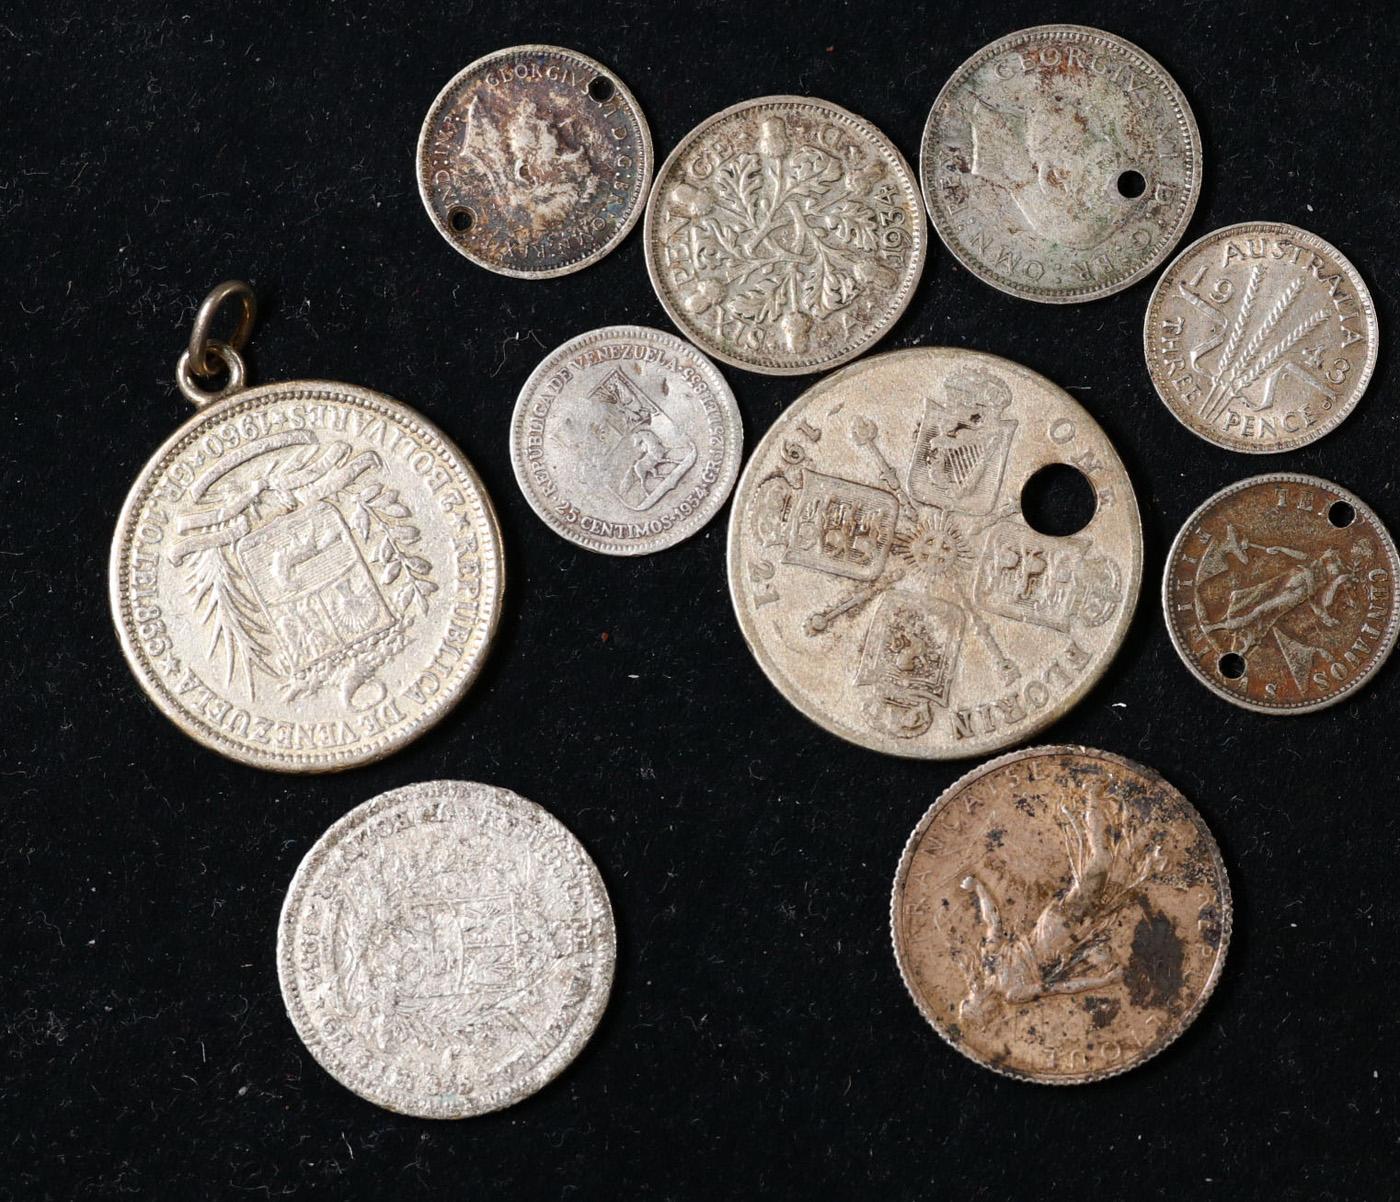 Group of 10 Coins - 1915 Franc, 1921 Florin, Venezuela 1 and 2 Bolivars, Aus. Threepence and Sixpenc